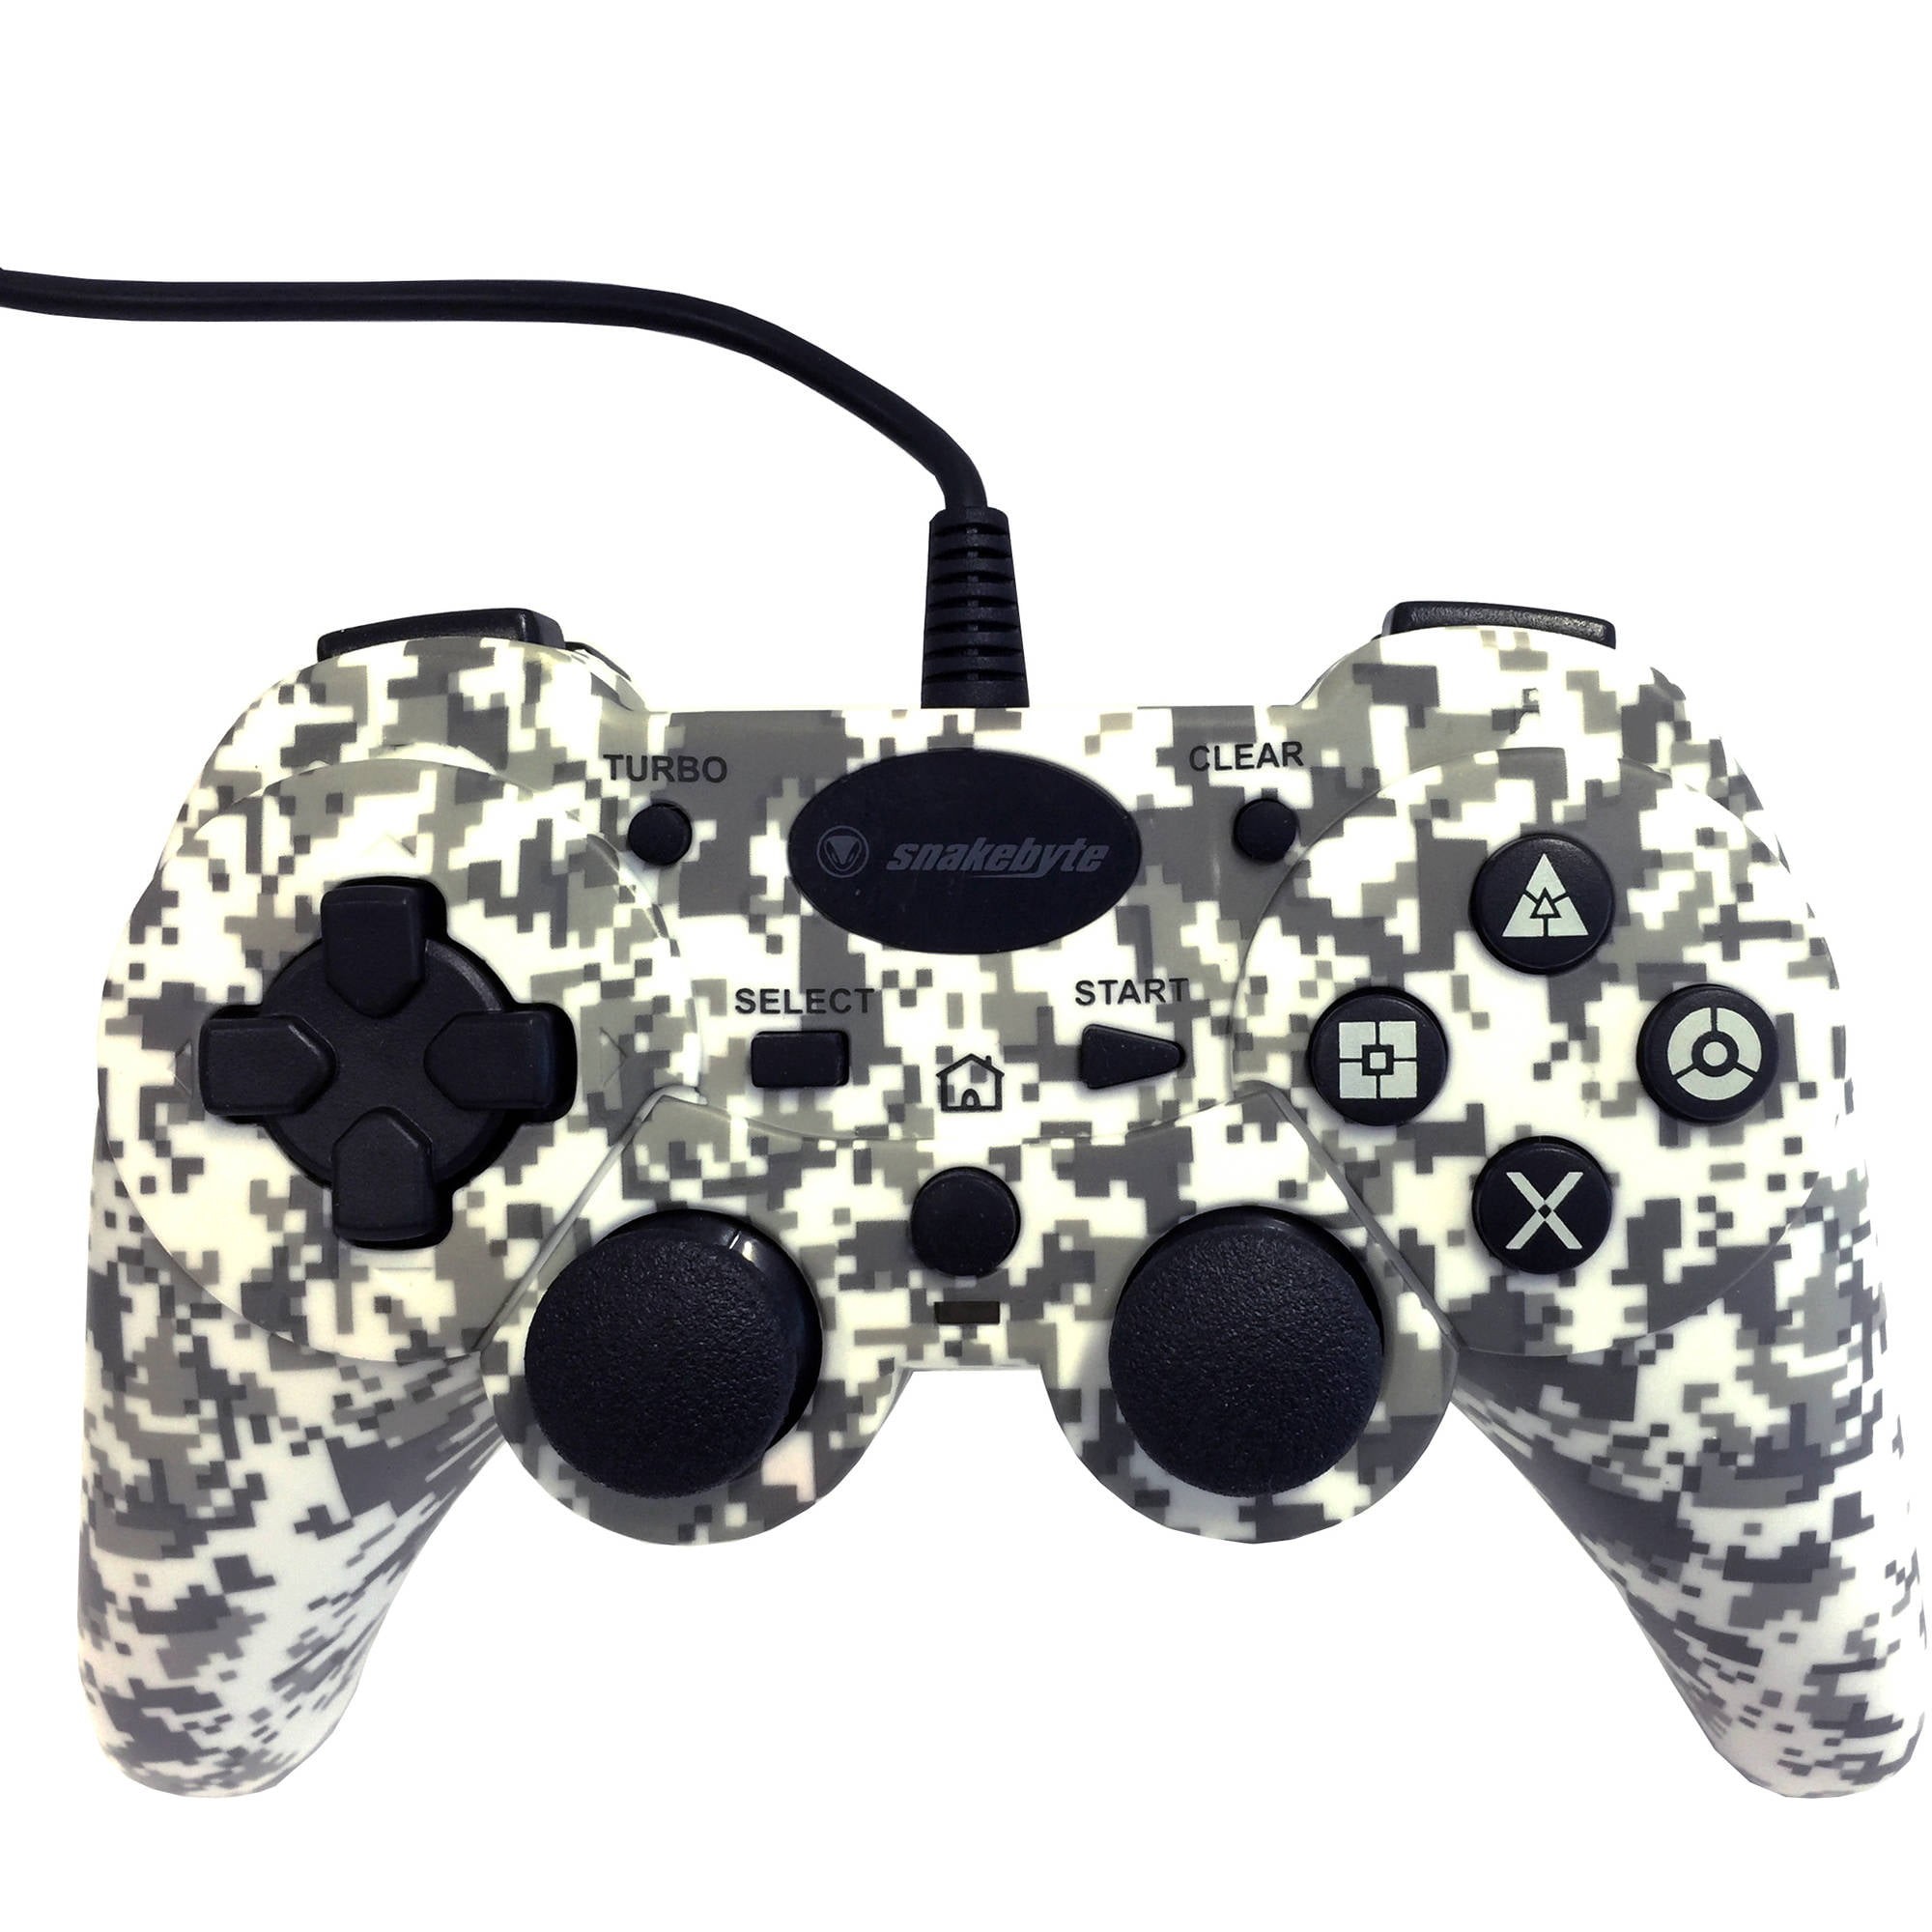 ps3 wired controller